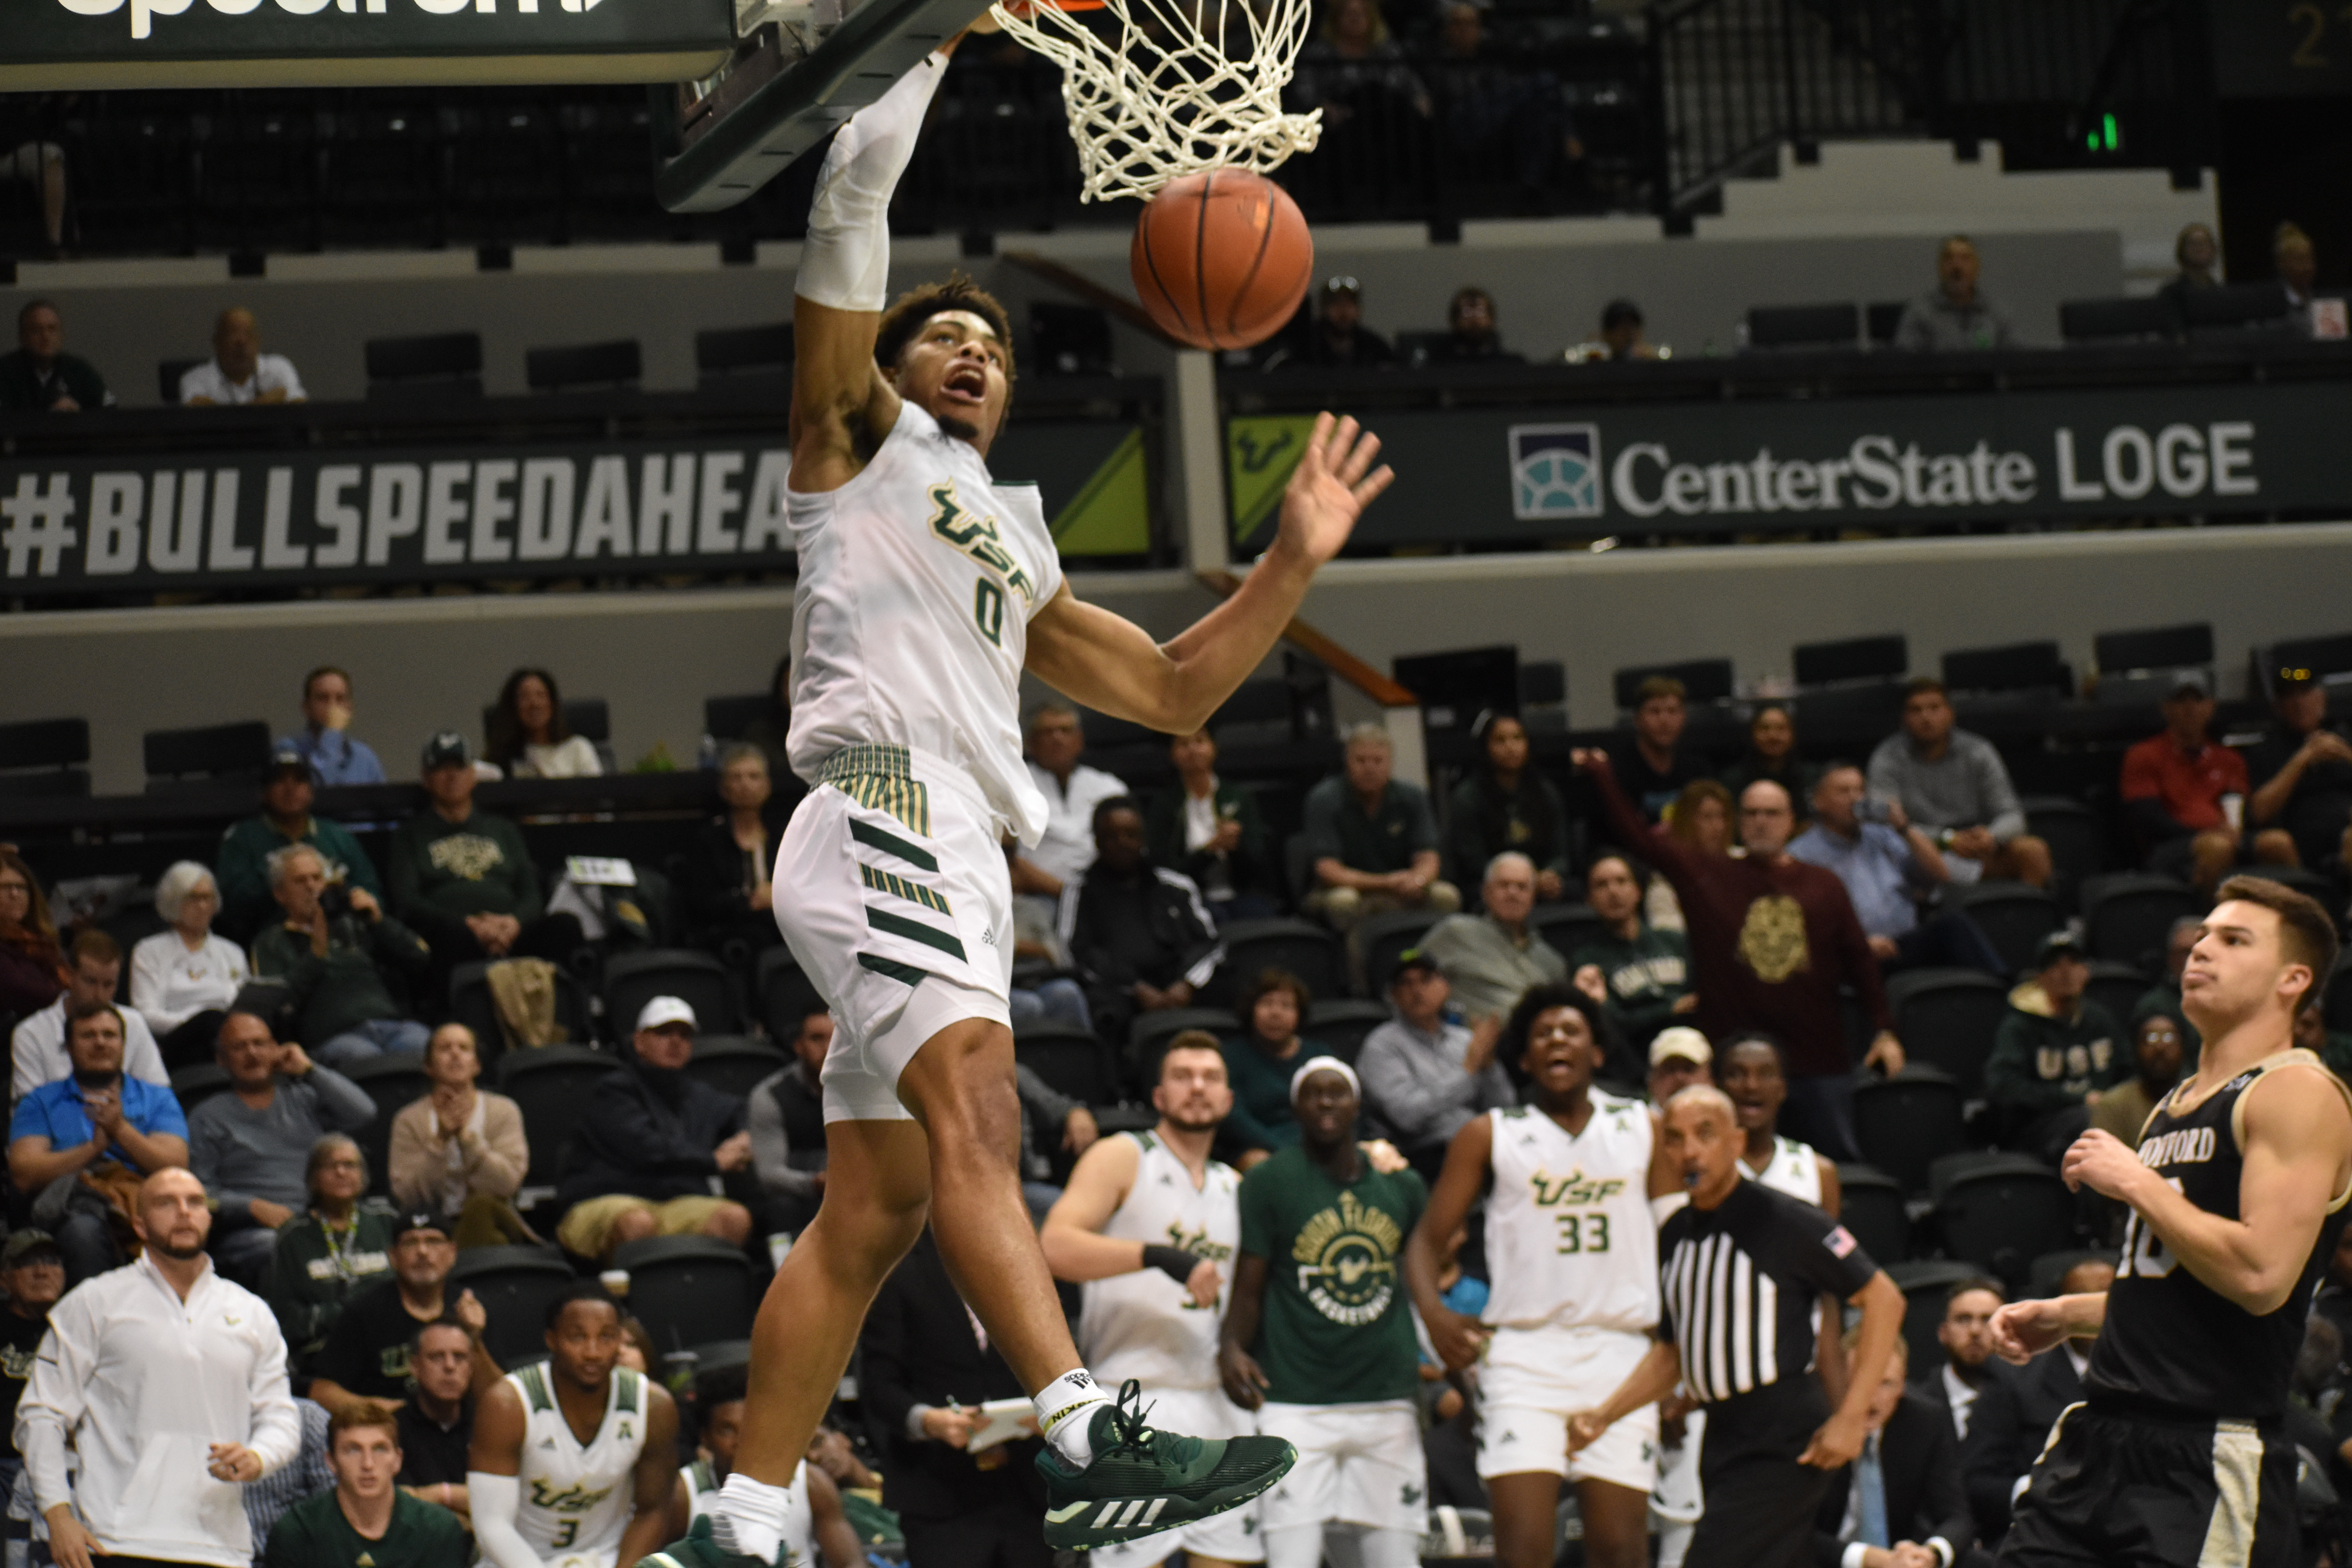 Small-ball lineup leads way in win over Wofford